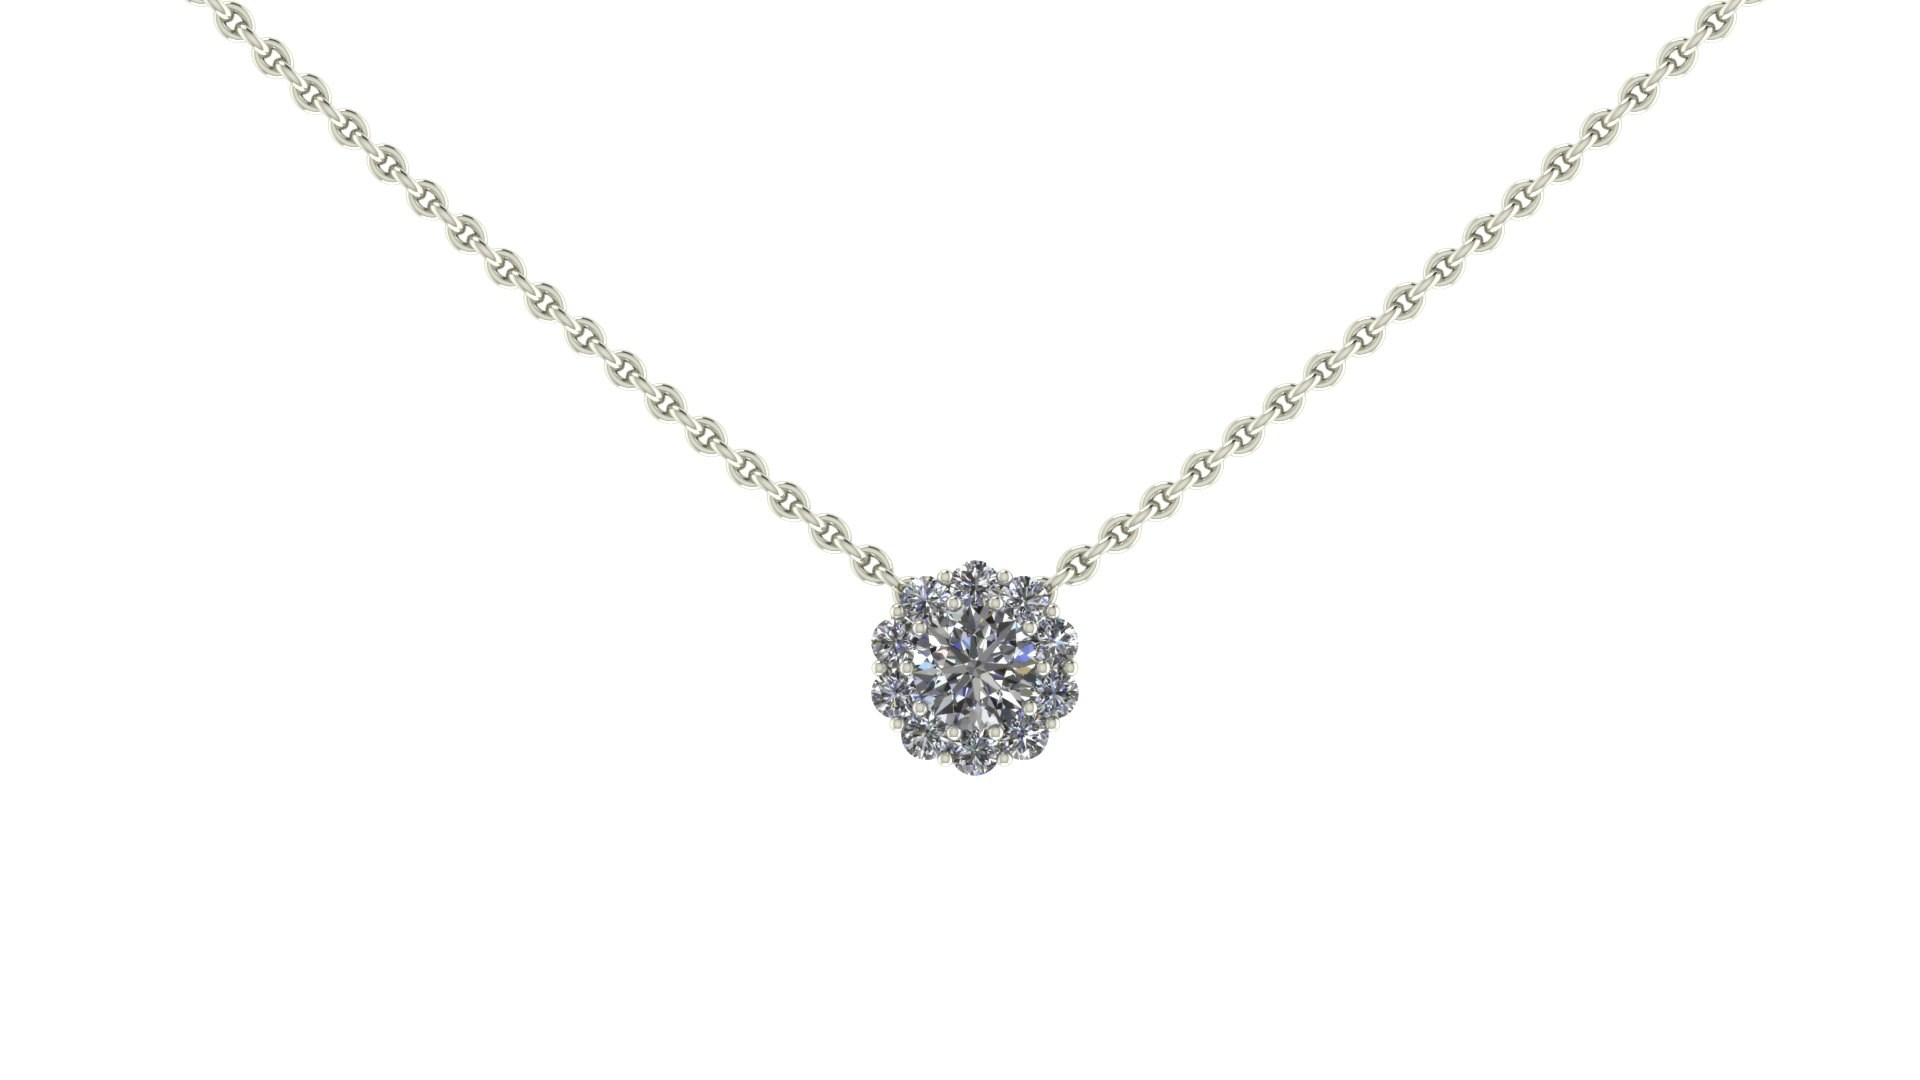 Bloomingdale's Diamond Cluster Round Pendant Necklace in 14K White Gold,  .35 ct. t.w. - 100% Exclusive | Bloomingdale's